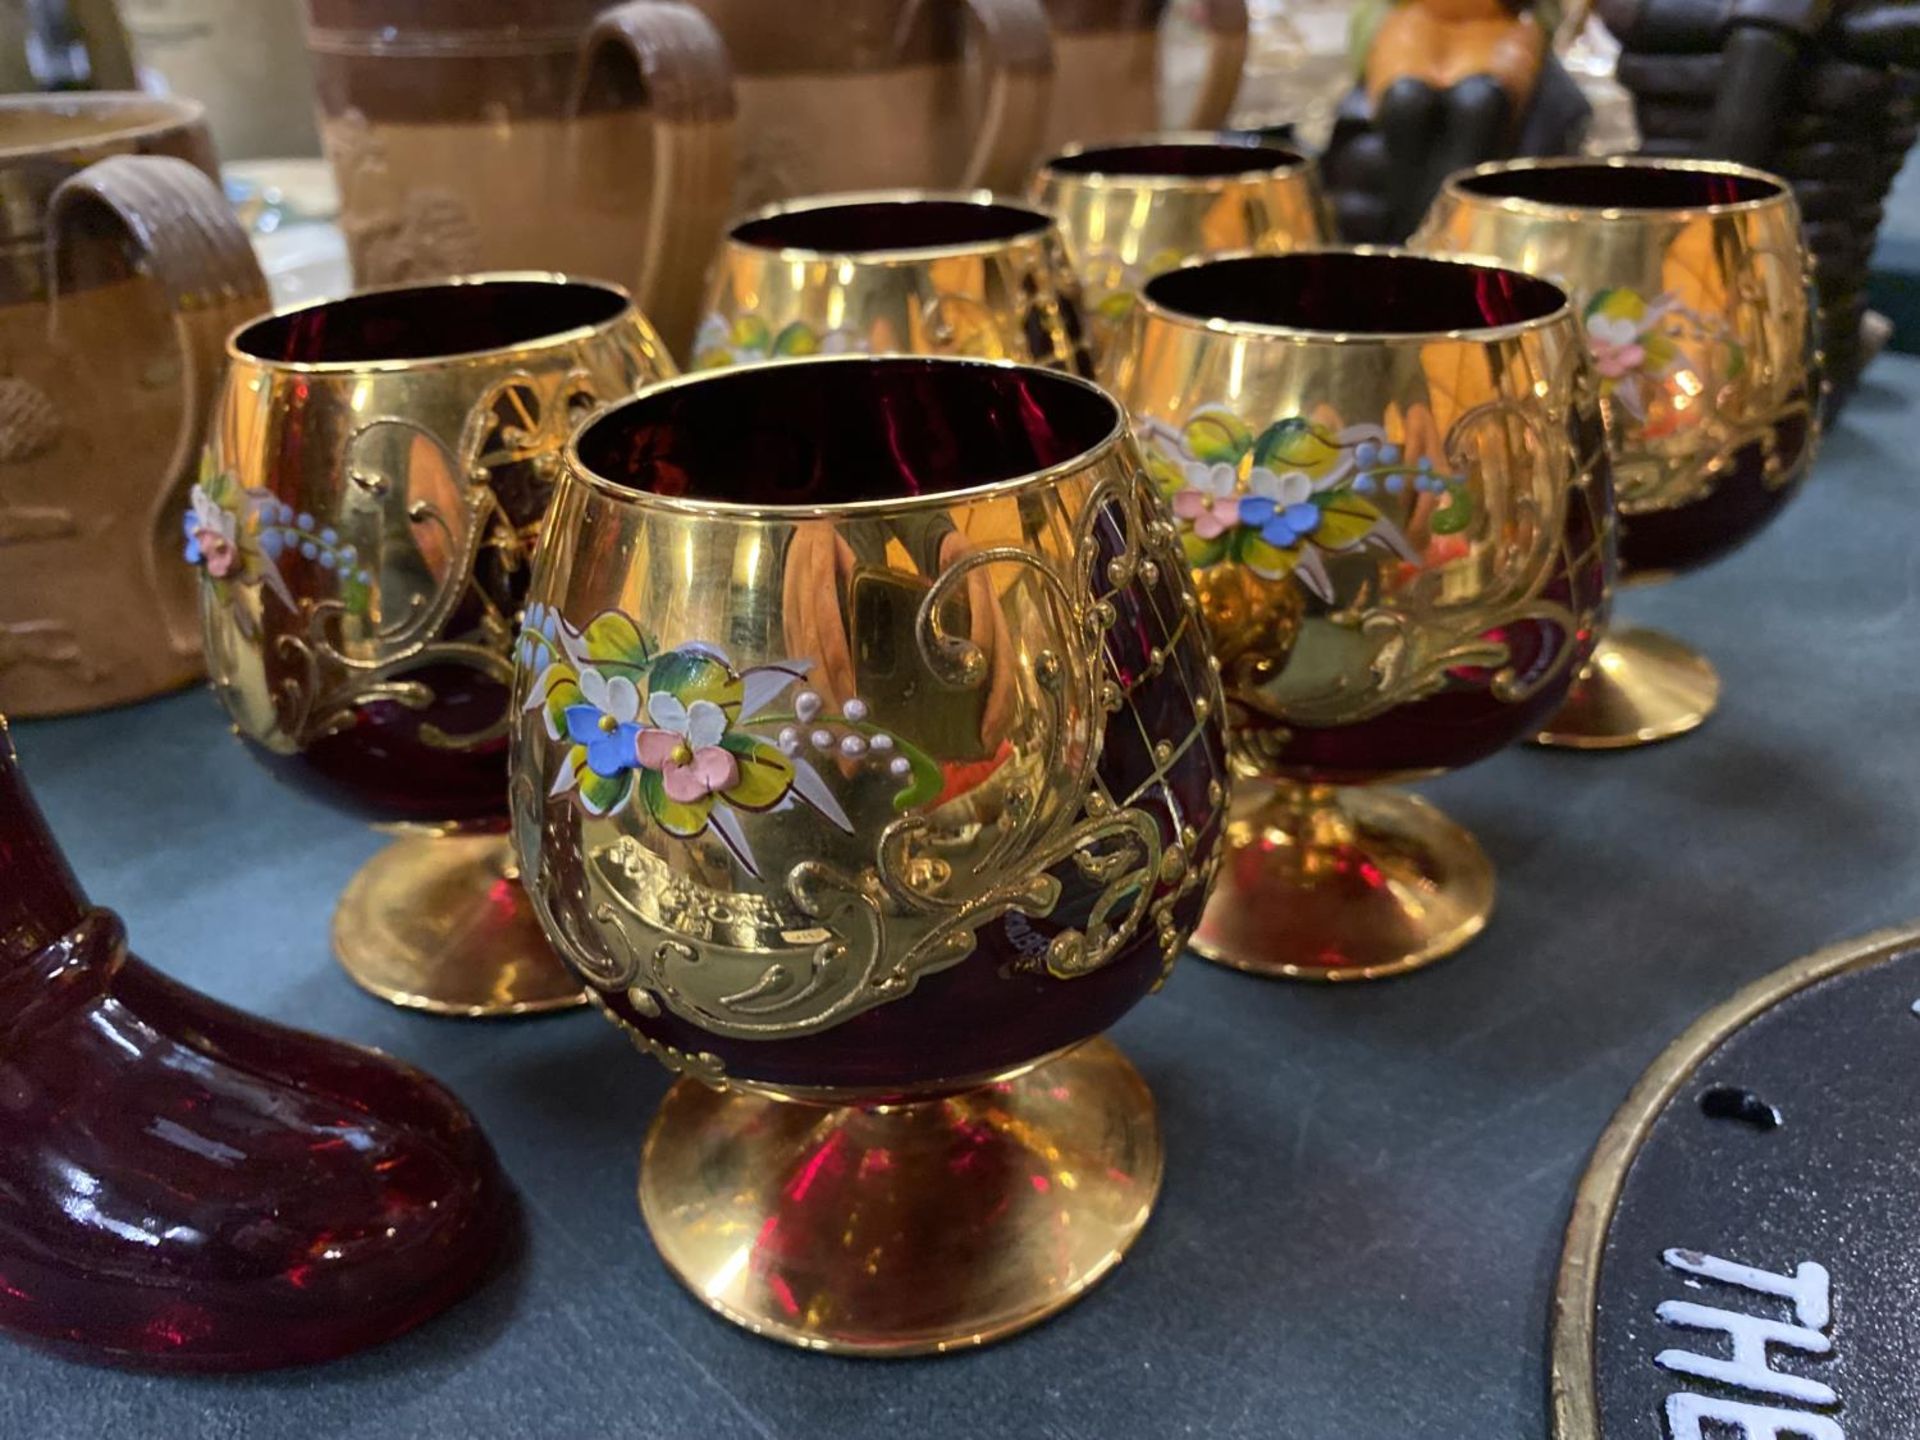 SIX GILDED DECORATIVE RED GLASSES AND A MATCHING BOOT - Image 3 of 3